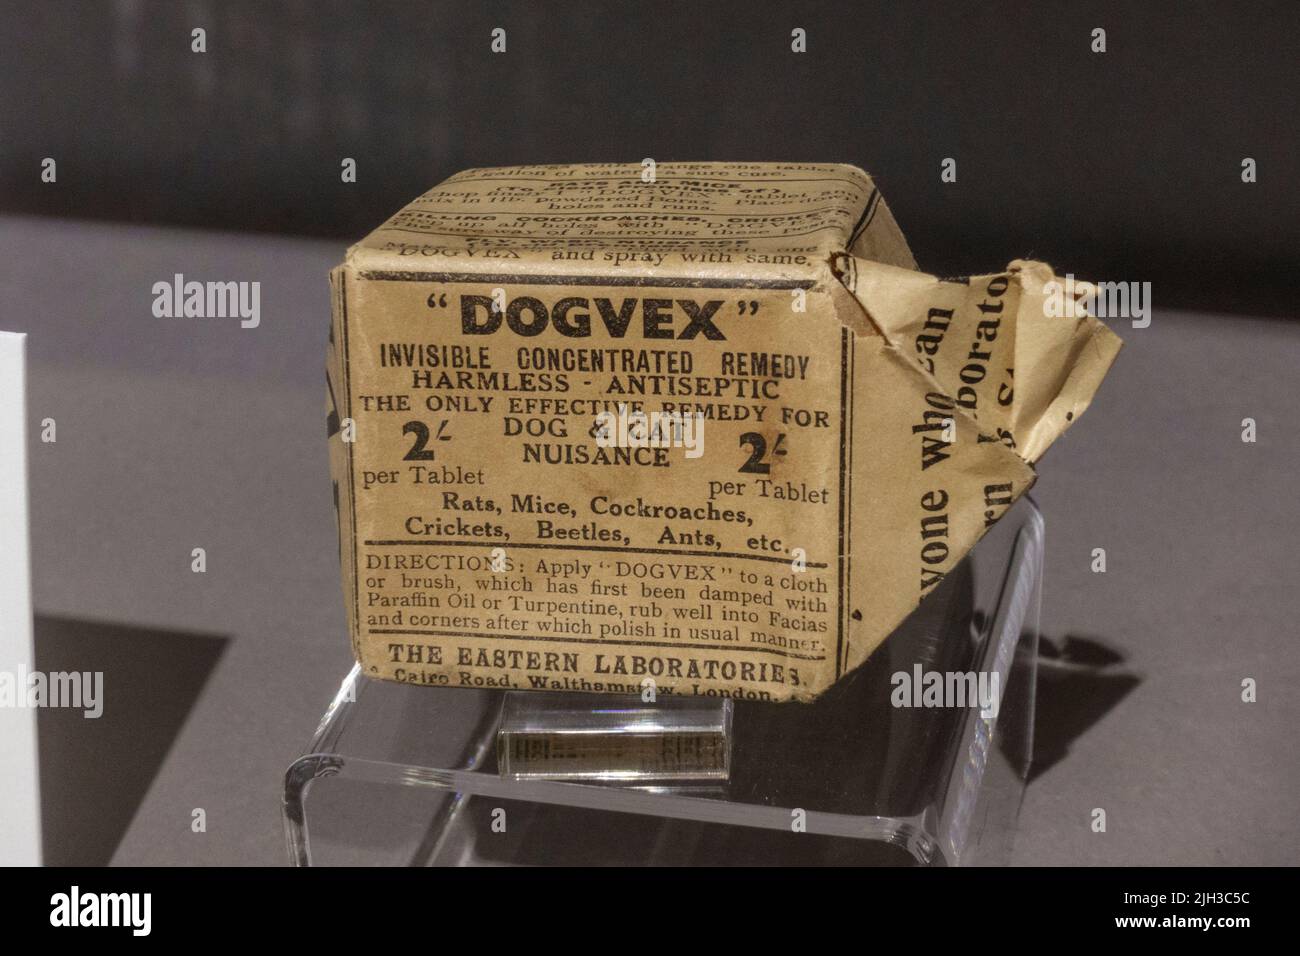 Dogvex Invisible Concentrated Remedy (c 1920s) on display in the Thackray Museum of Medicine, Leeds, UK. Stock Photo